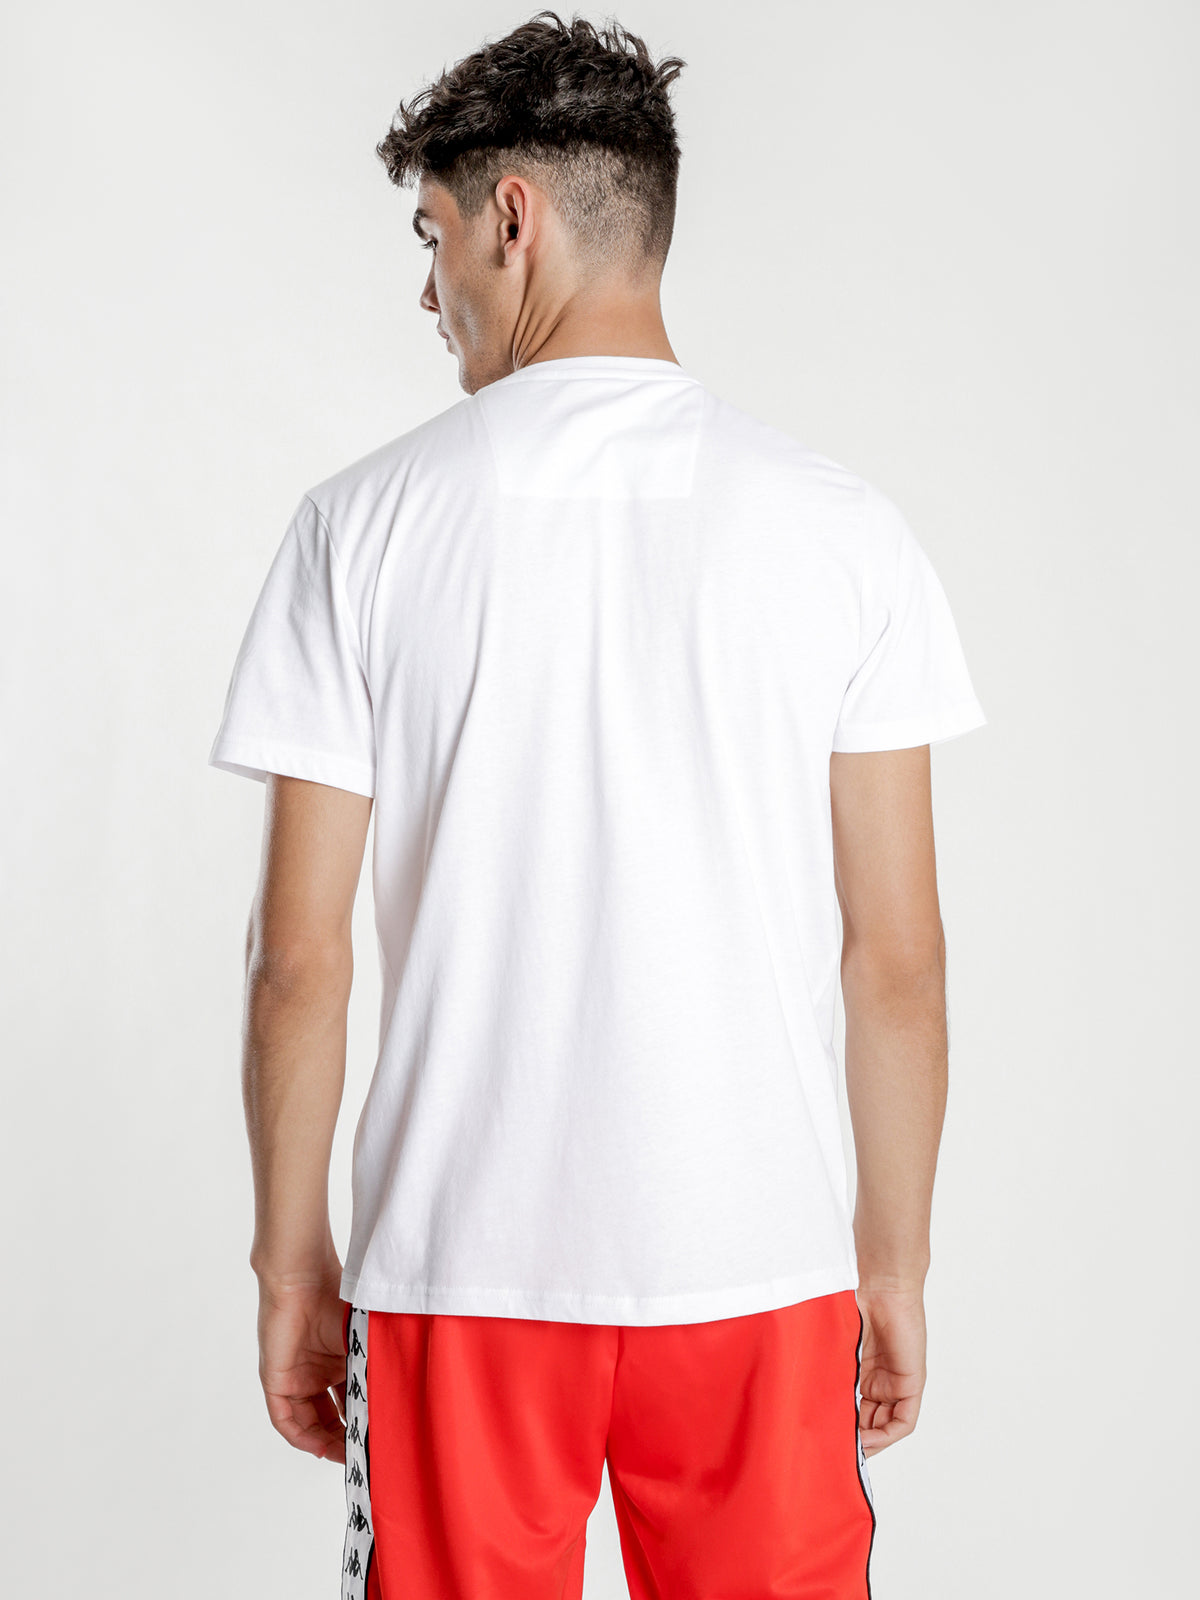 Authentic Astessi T-Shirt in White